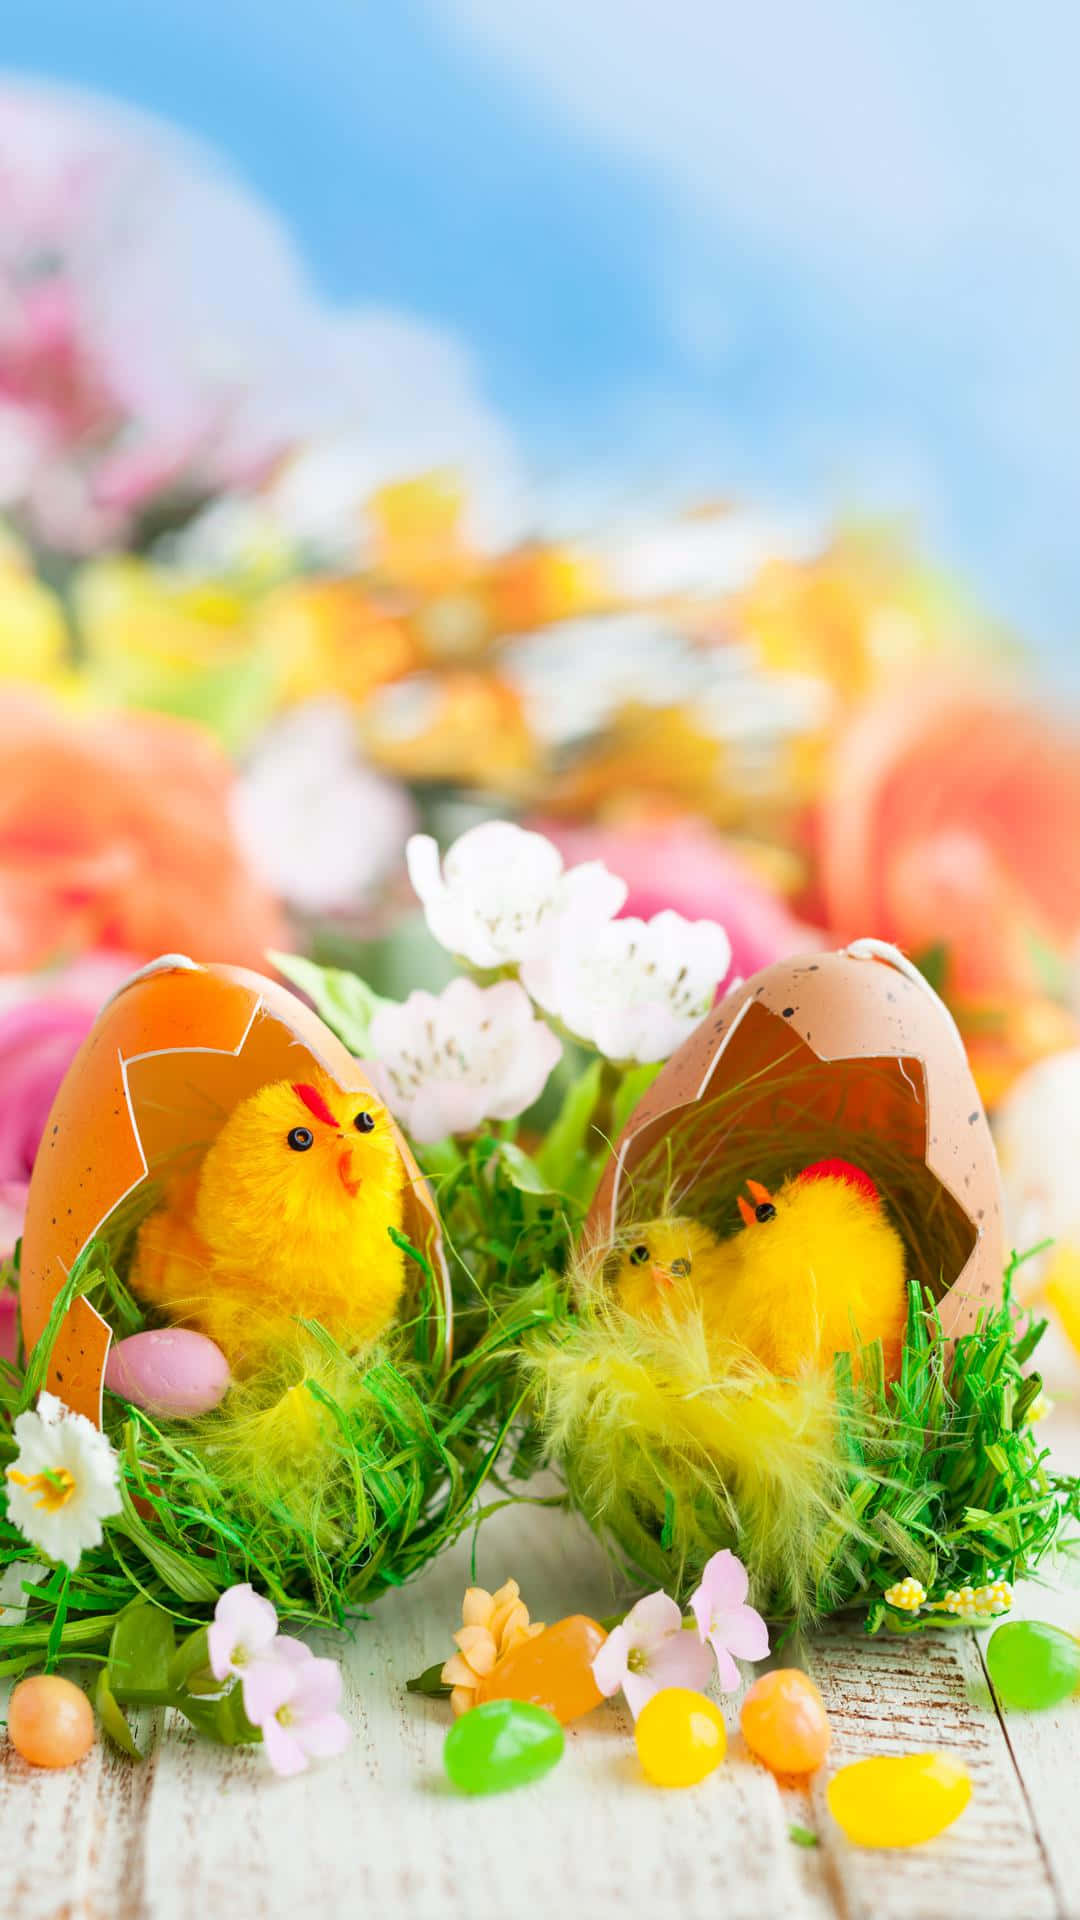 Cute Easter Iphone With Two Hatched Eggs Wallpaper